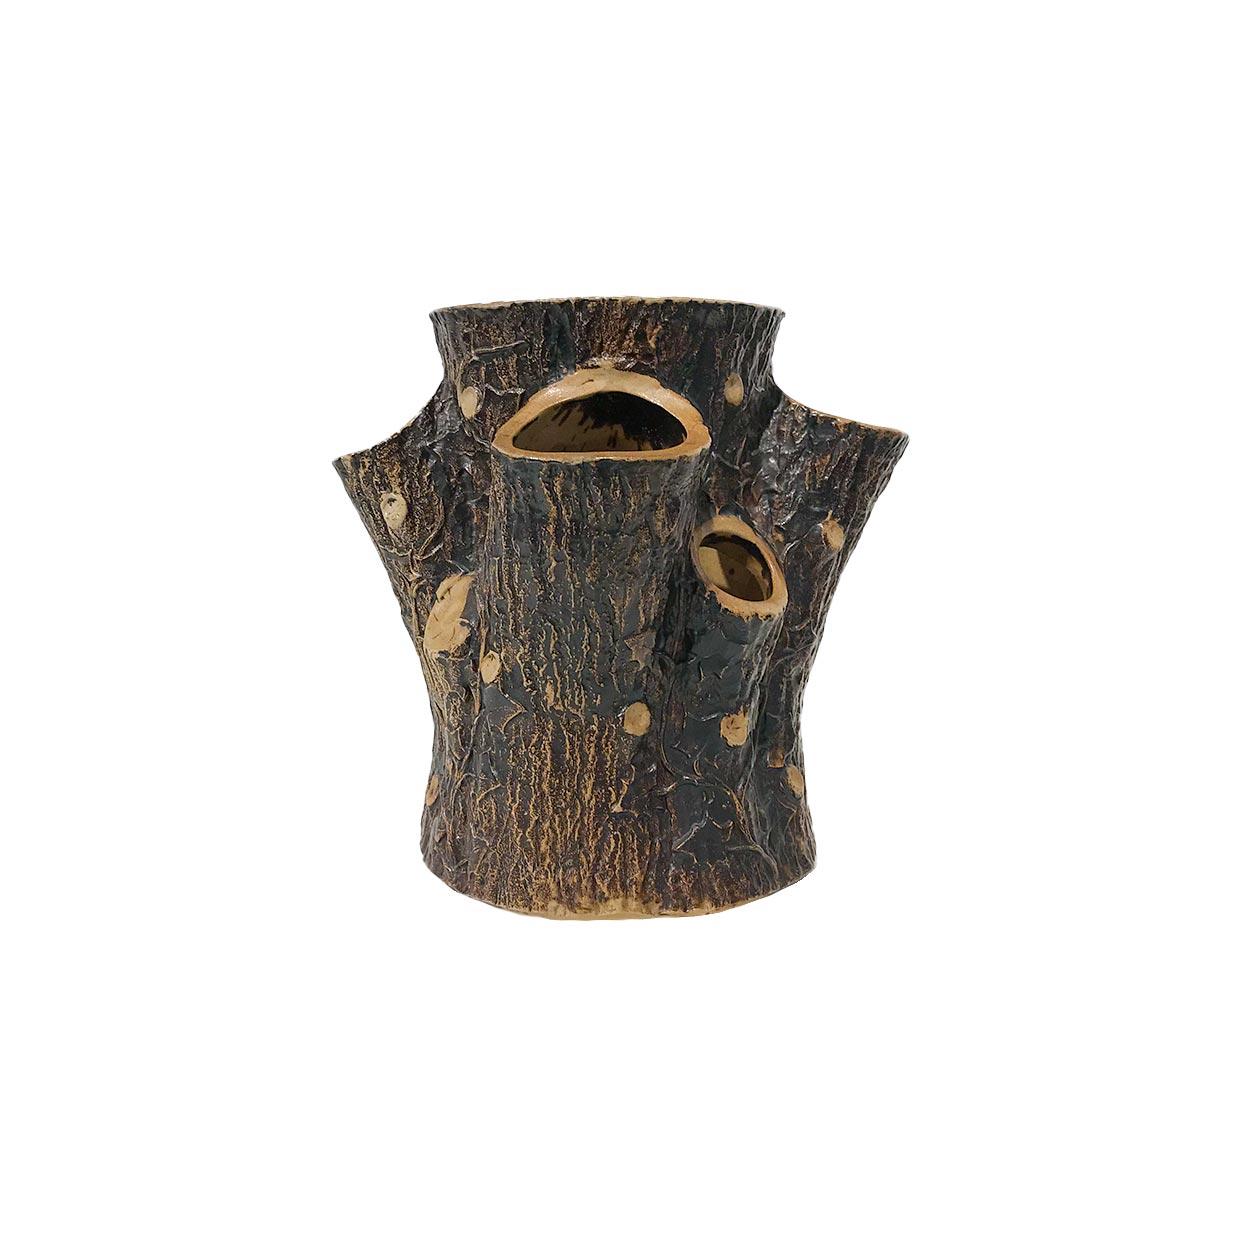 19th century glazed molded stoneware planter of tree stump form. Molded with bark surface and cut branches forming 5 small openings in addition to the large central opening. Impressed F.B. Norton & Co., Worcester, Mass on the bottom. (Minor chips).